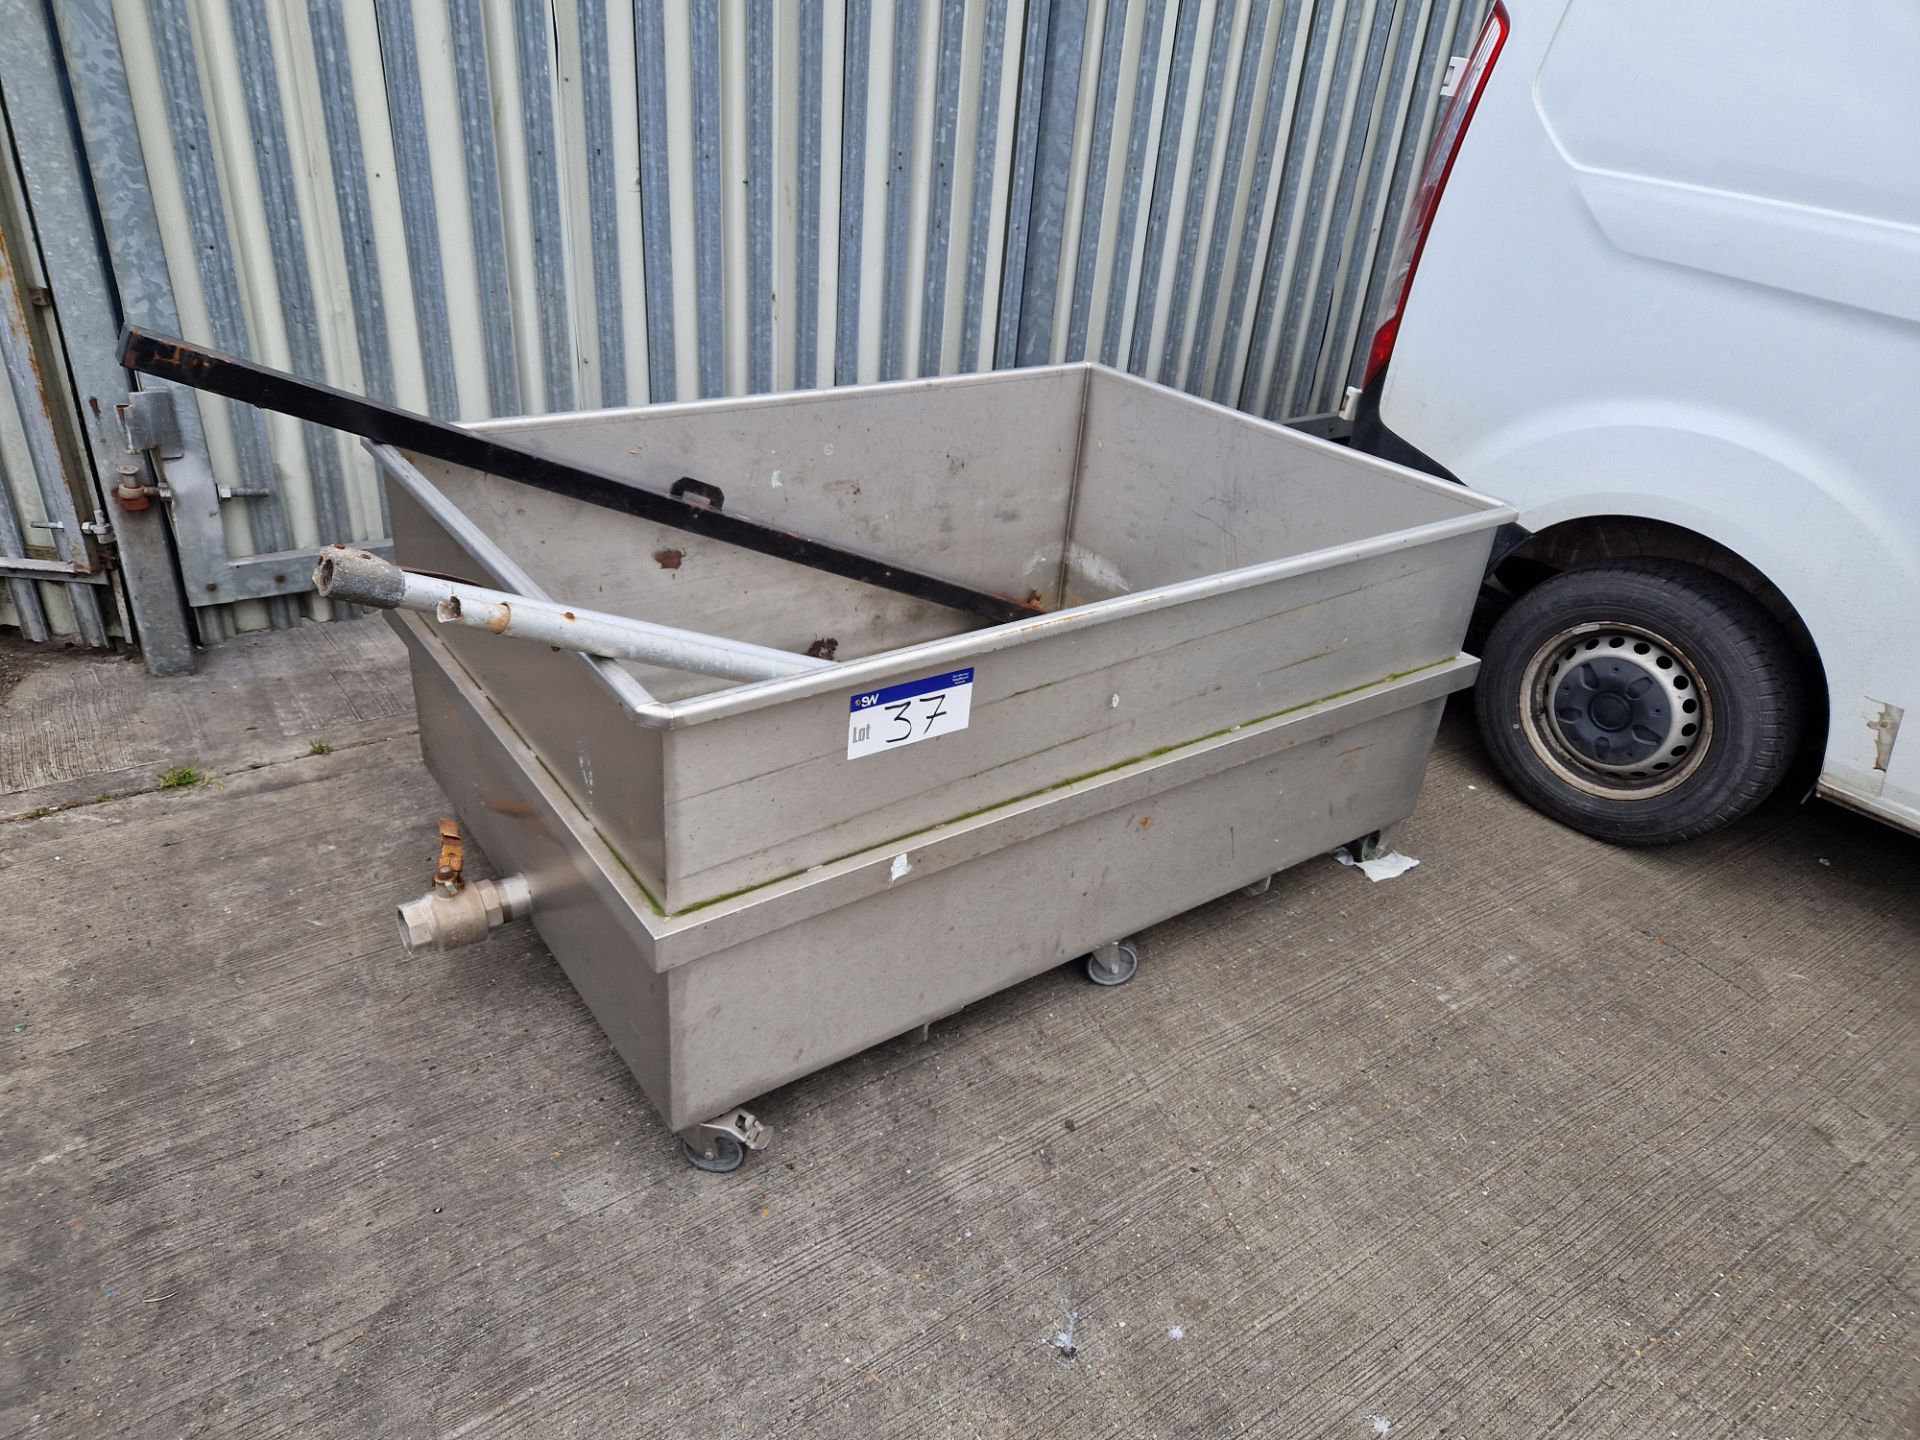 Stainless Steel Mobile Water Tank, approx. 1.8m x 1.25m x 0.85mPlease read the following important